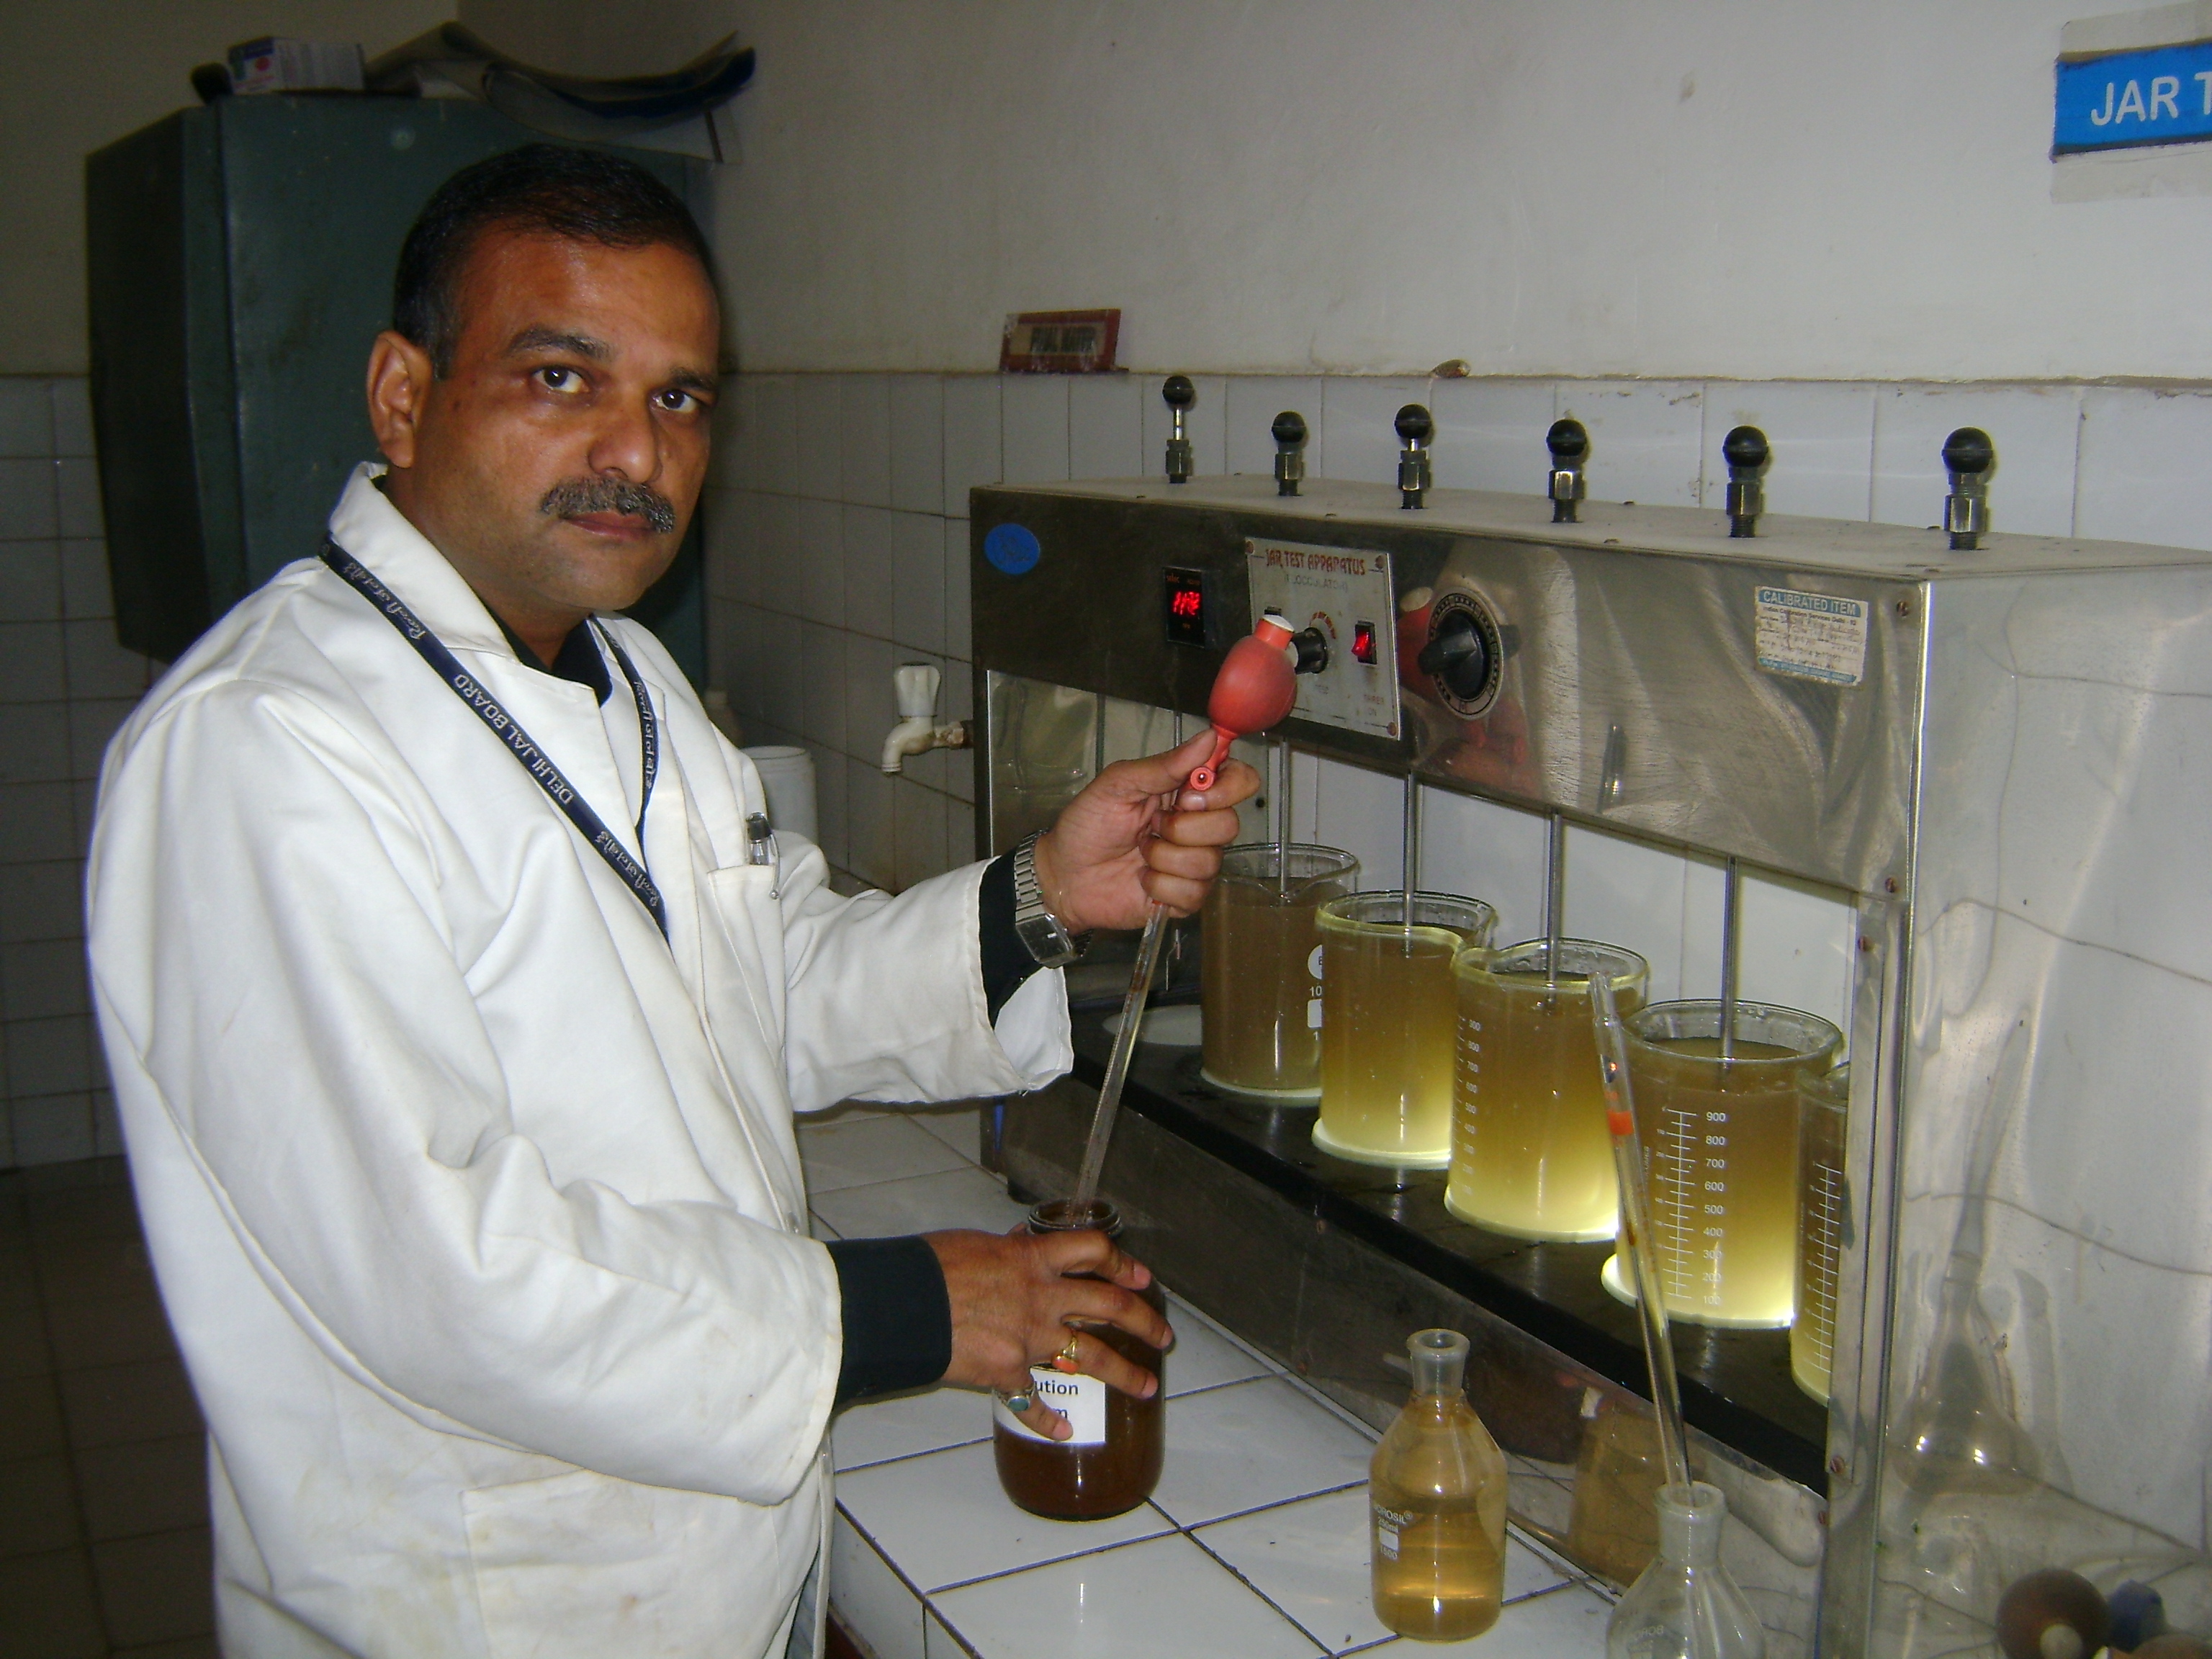 Lokesh Kumar, Chartered Chemist, Assistant Chemist at Delhi Jal Board, Government of NCT Delhi (Formerly: Municipal Water Supply & Sewage Disposal Undertaking)